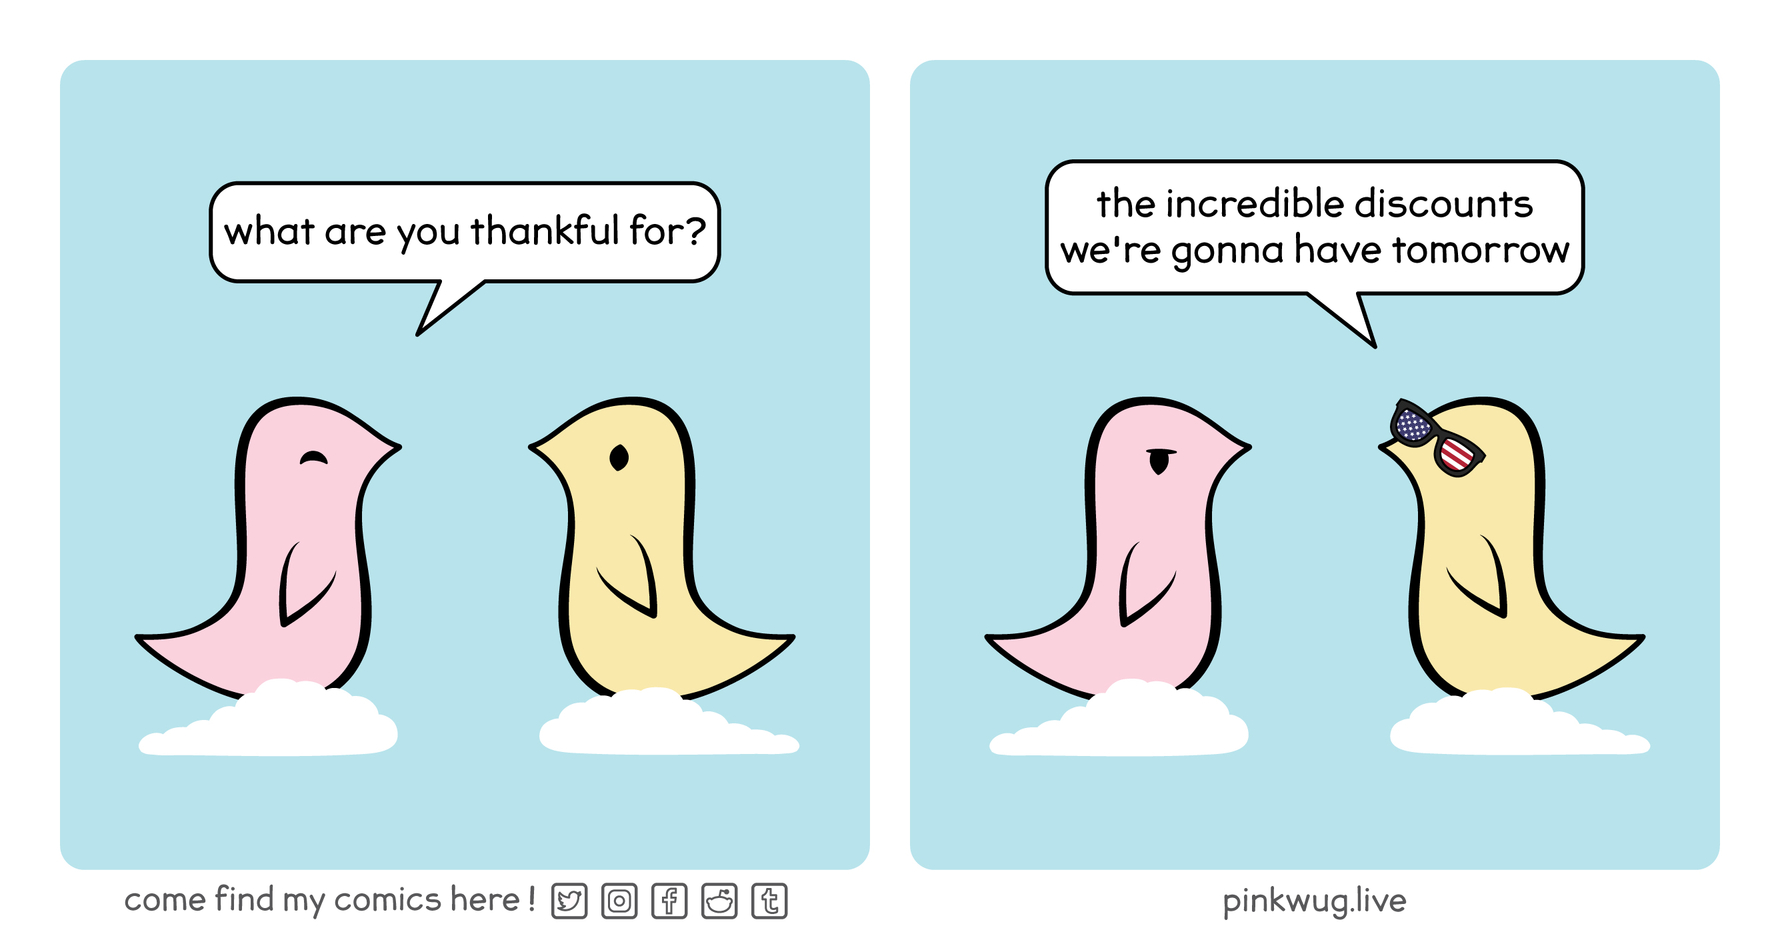 pinkwug comic: Panel 1:
Pink wug to yellow wug: "what are you thankful for?"

Panel 2:
Yellow wug with sunglasses with the American flag on it: "the incredible discounts we're gonna have tomorrow"